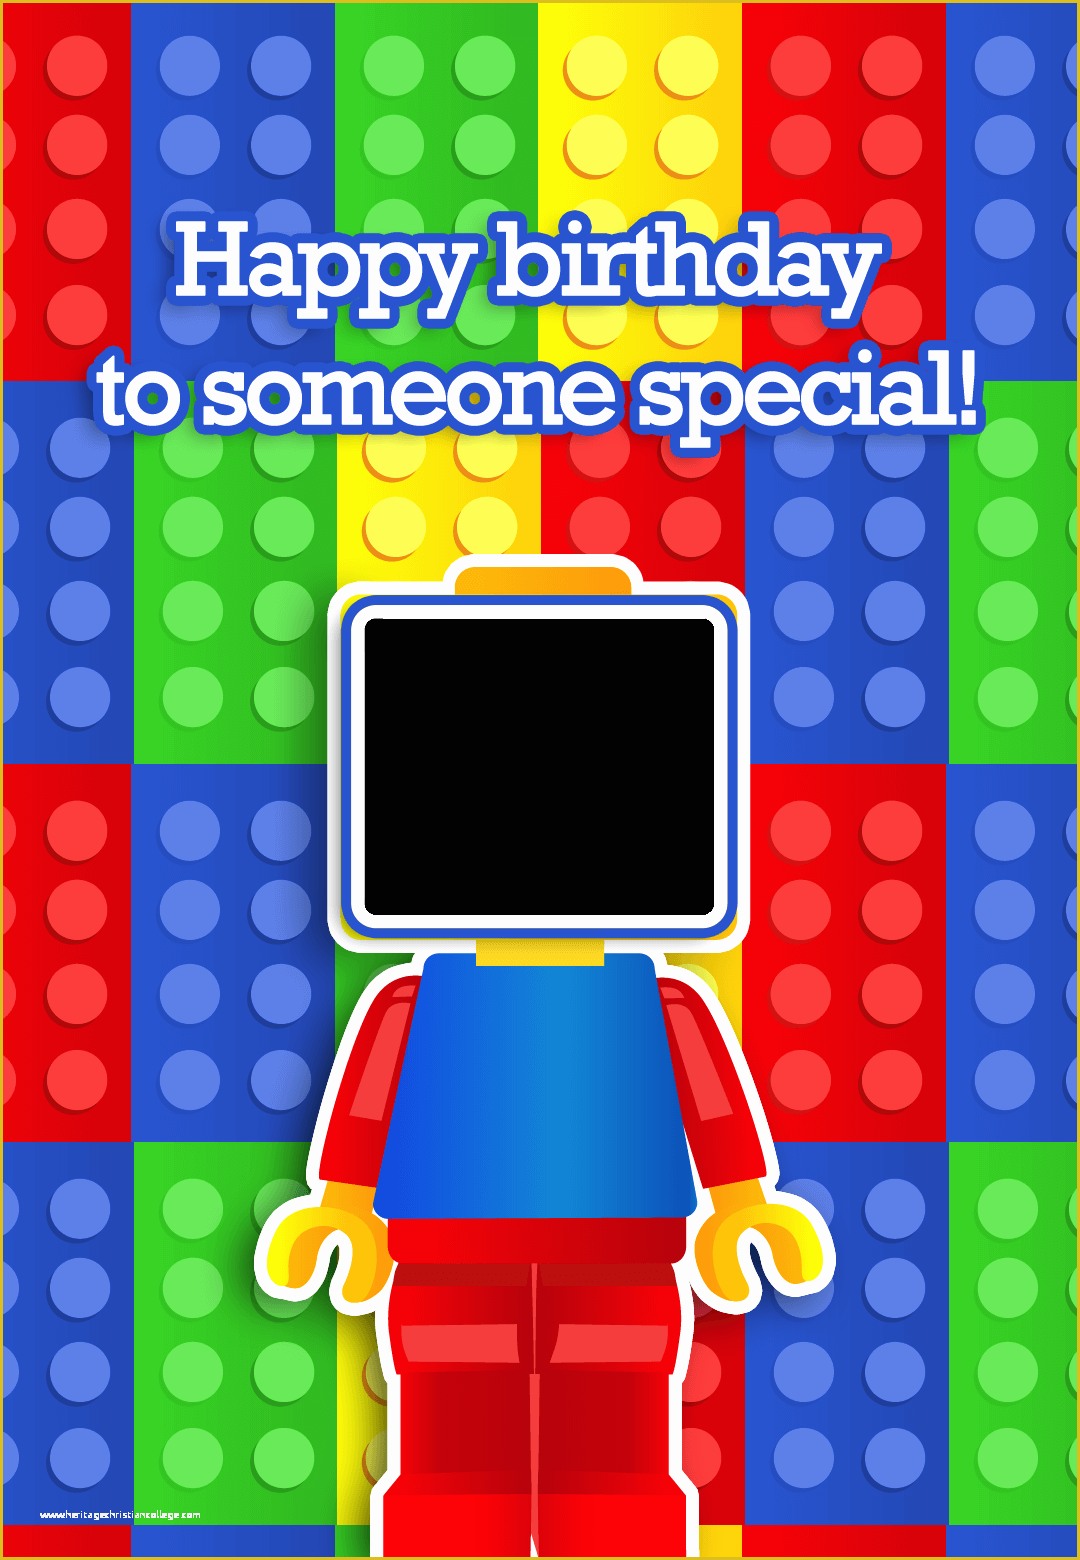 Free Photo Birthday Card Template Of to someone Special Birthday Card Free